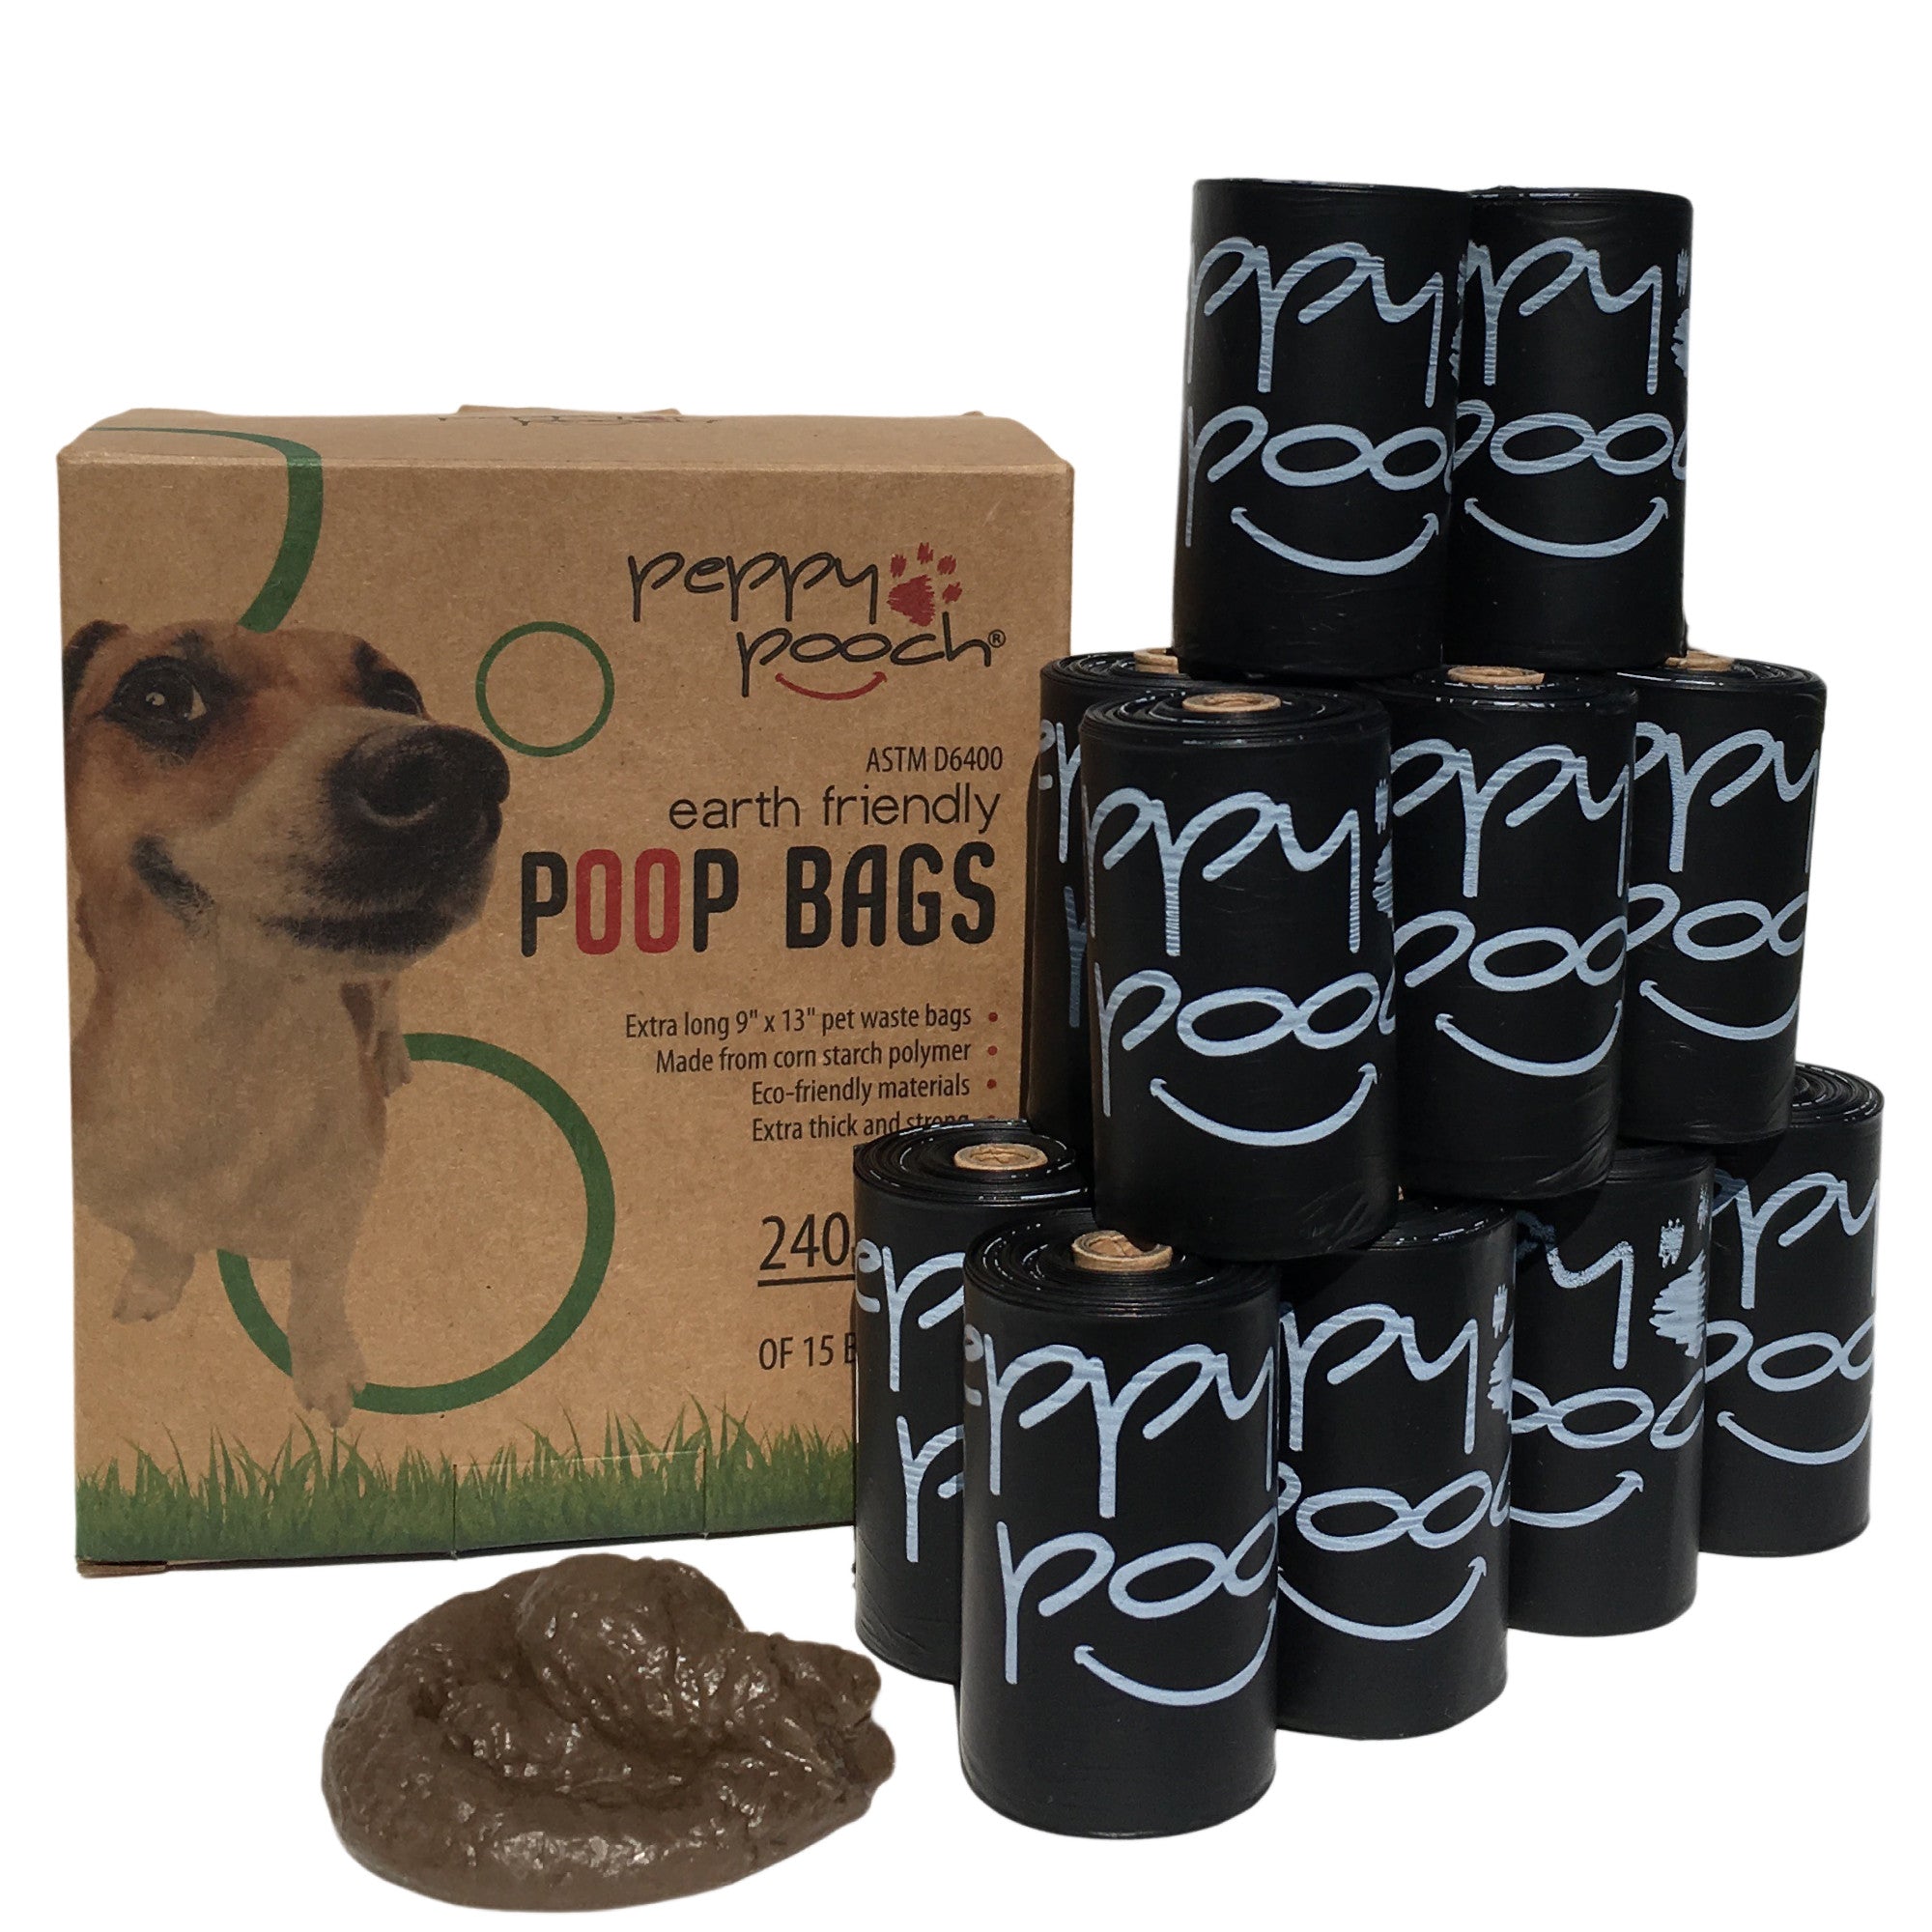 What's With All the Dog Poop Bags?